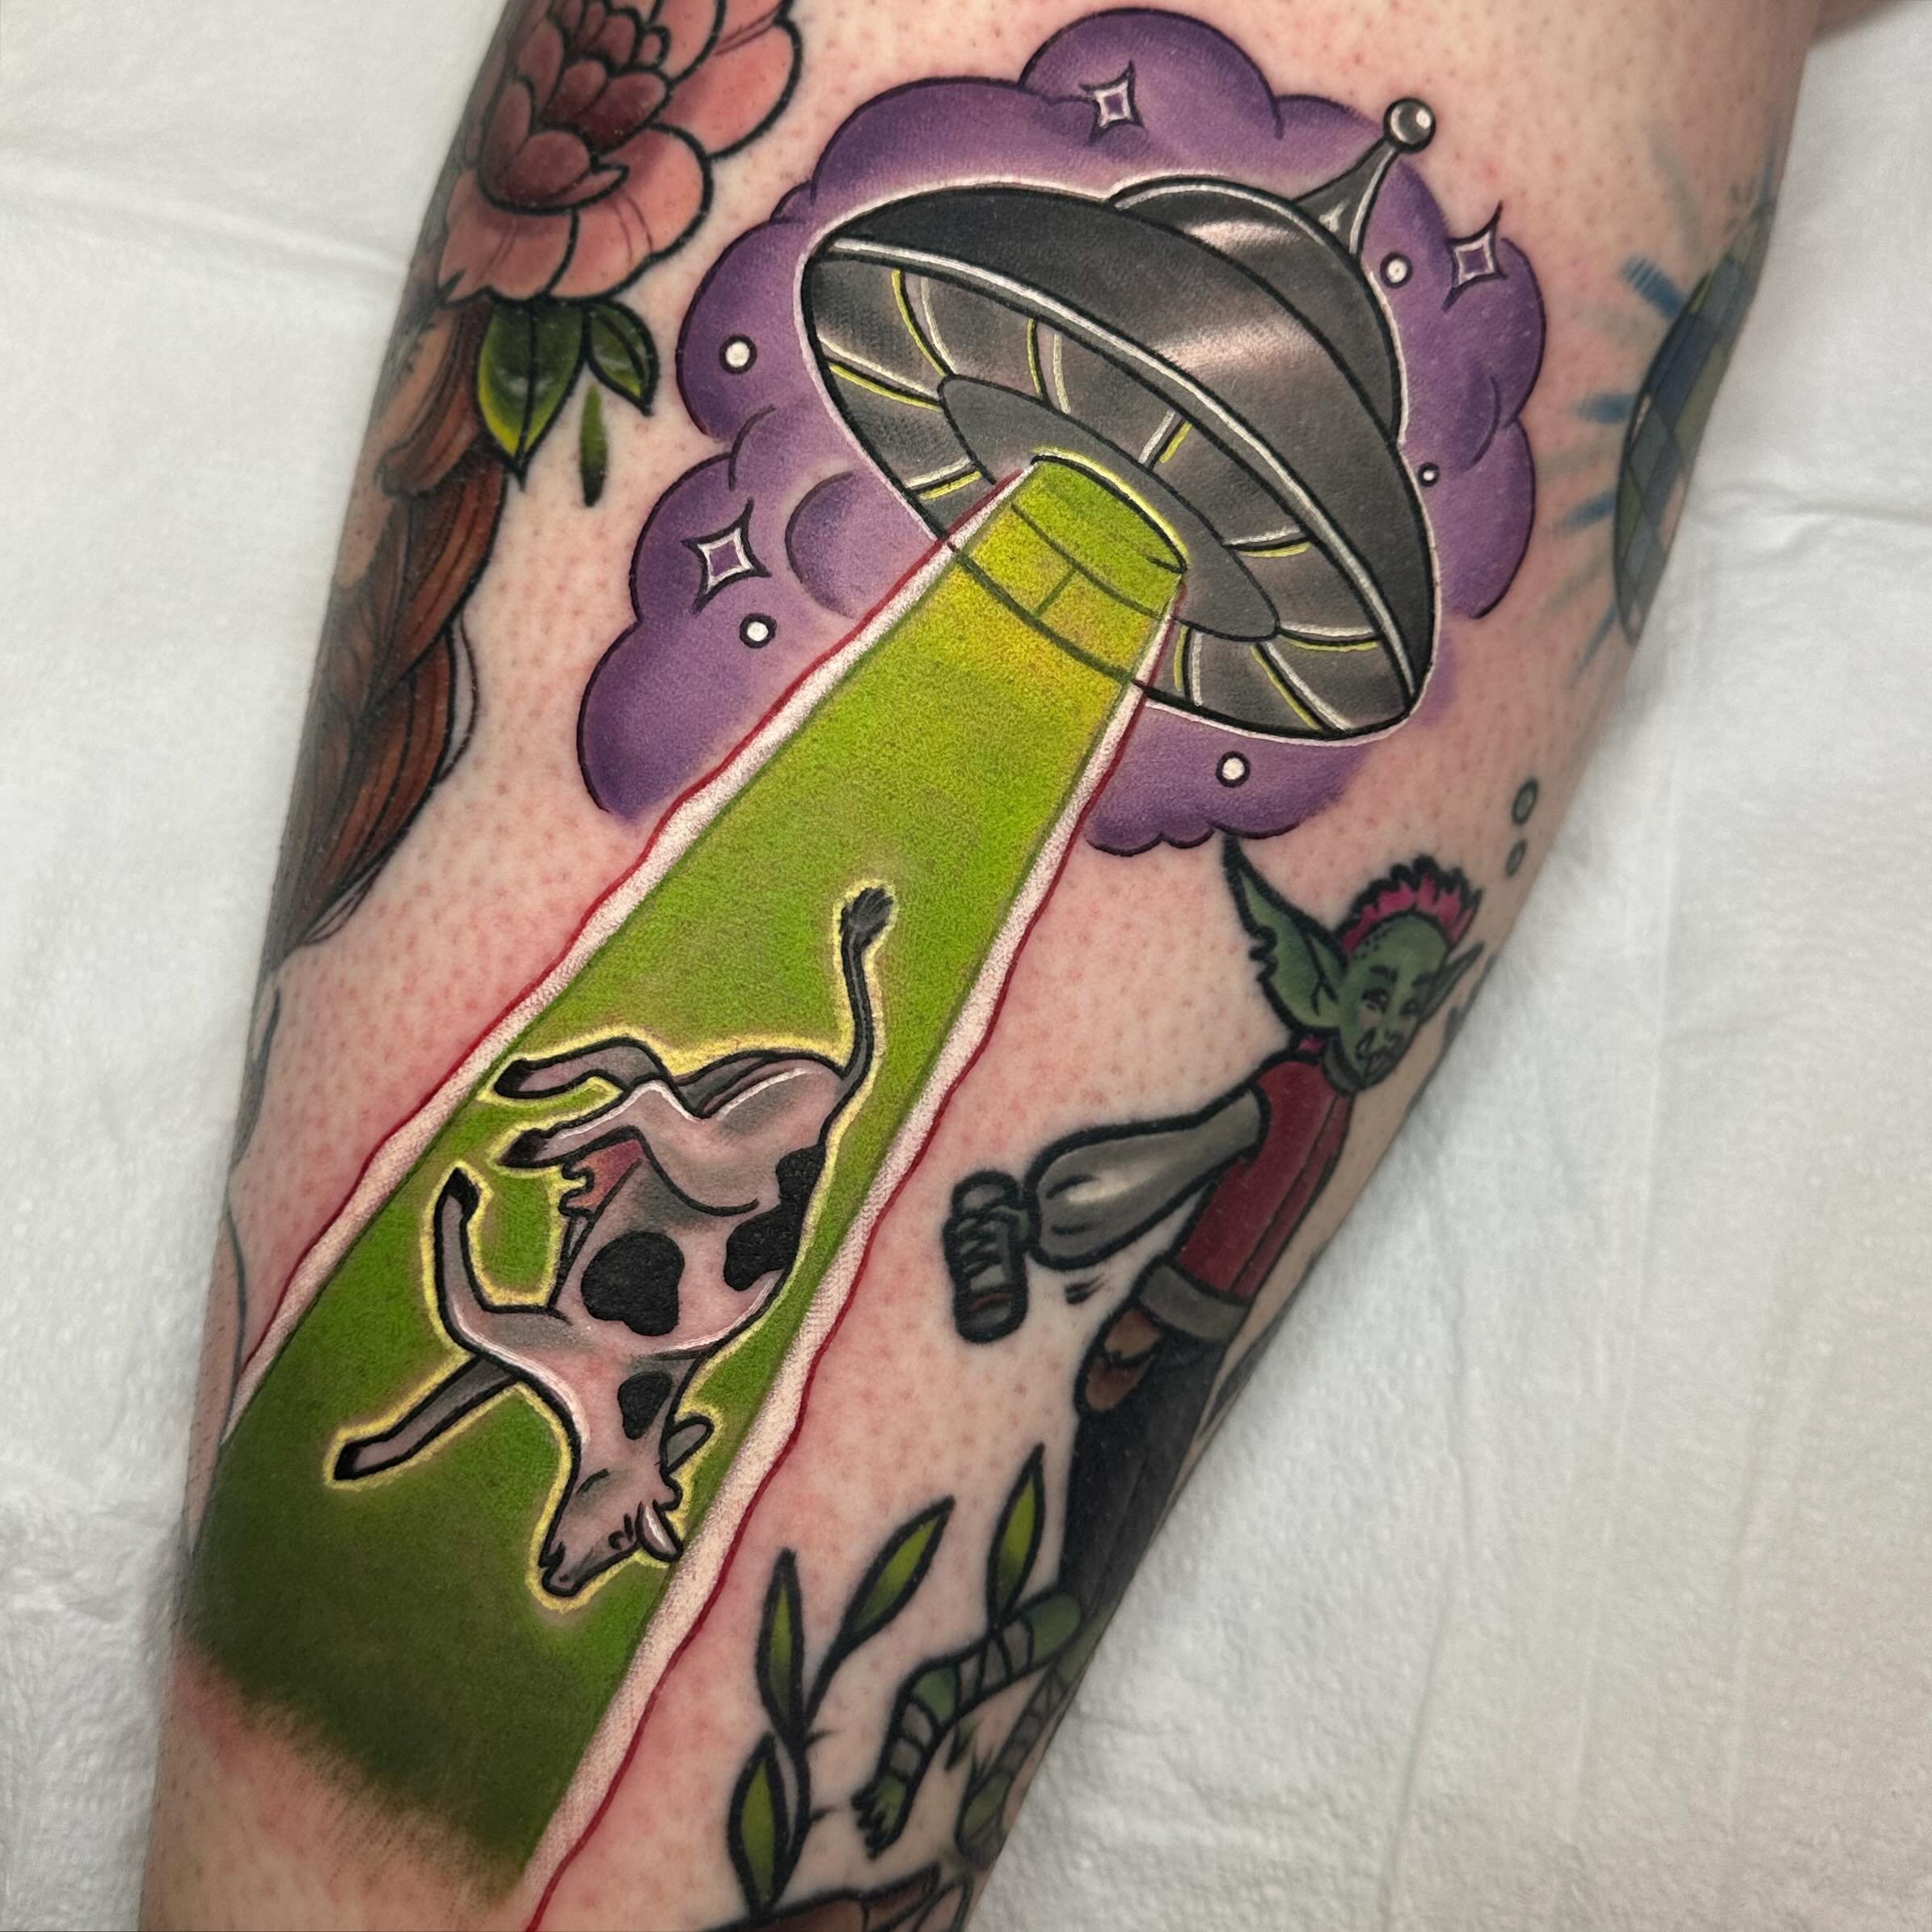 An insanely fun one for @goblinparty. I got to see THREE of my favorite clients in a row last week. 
.
.
.
.
#ufotattoo #thetruthisoutthere #aliens #alientattoo #eugeneoregon #oregon #pnw #oregontattoo